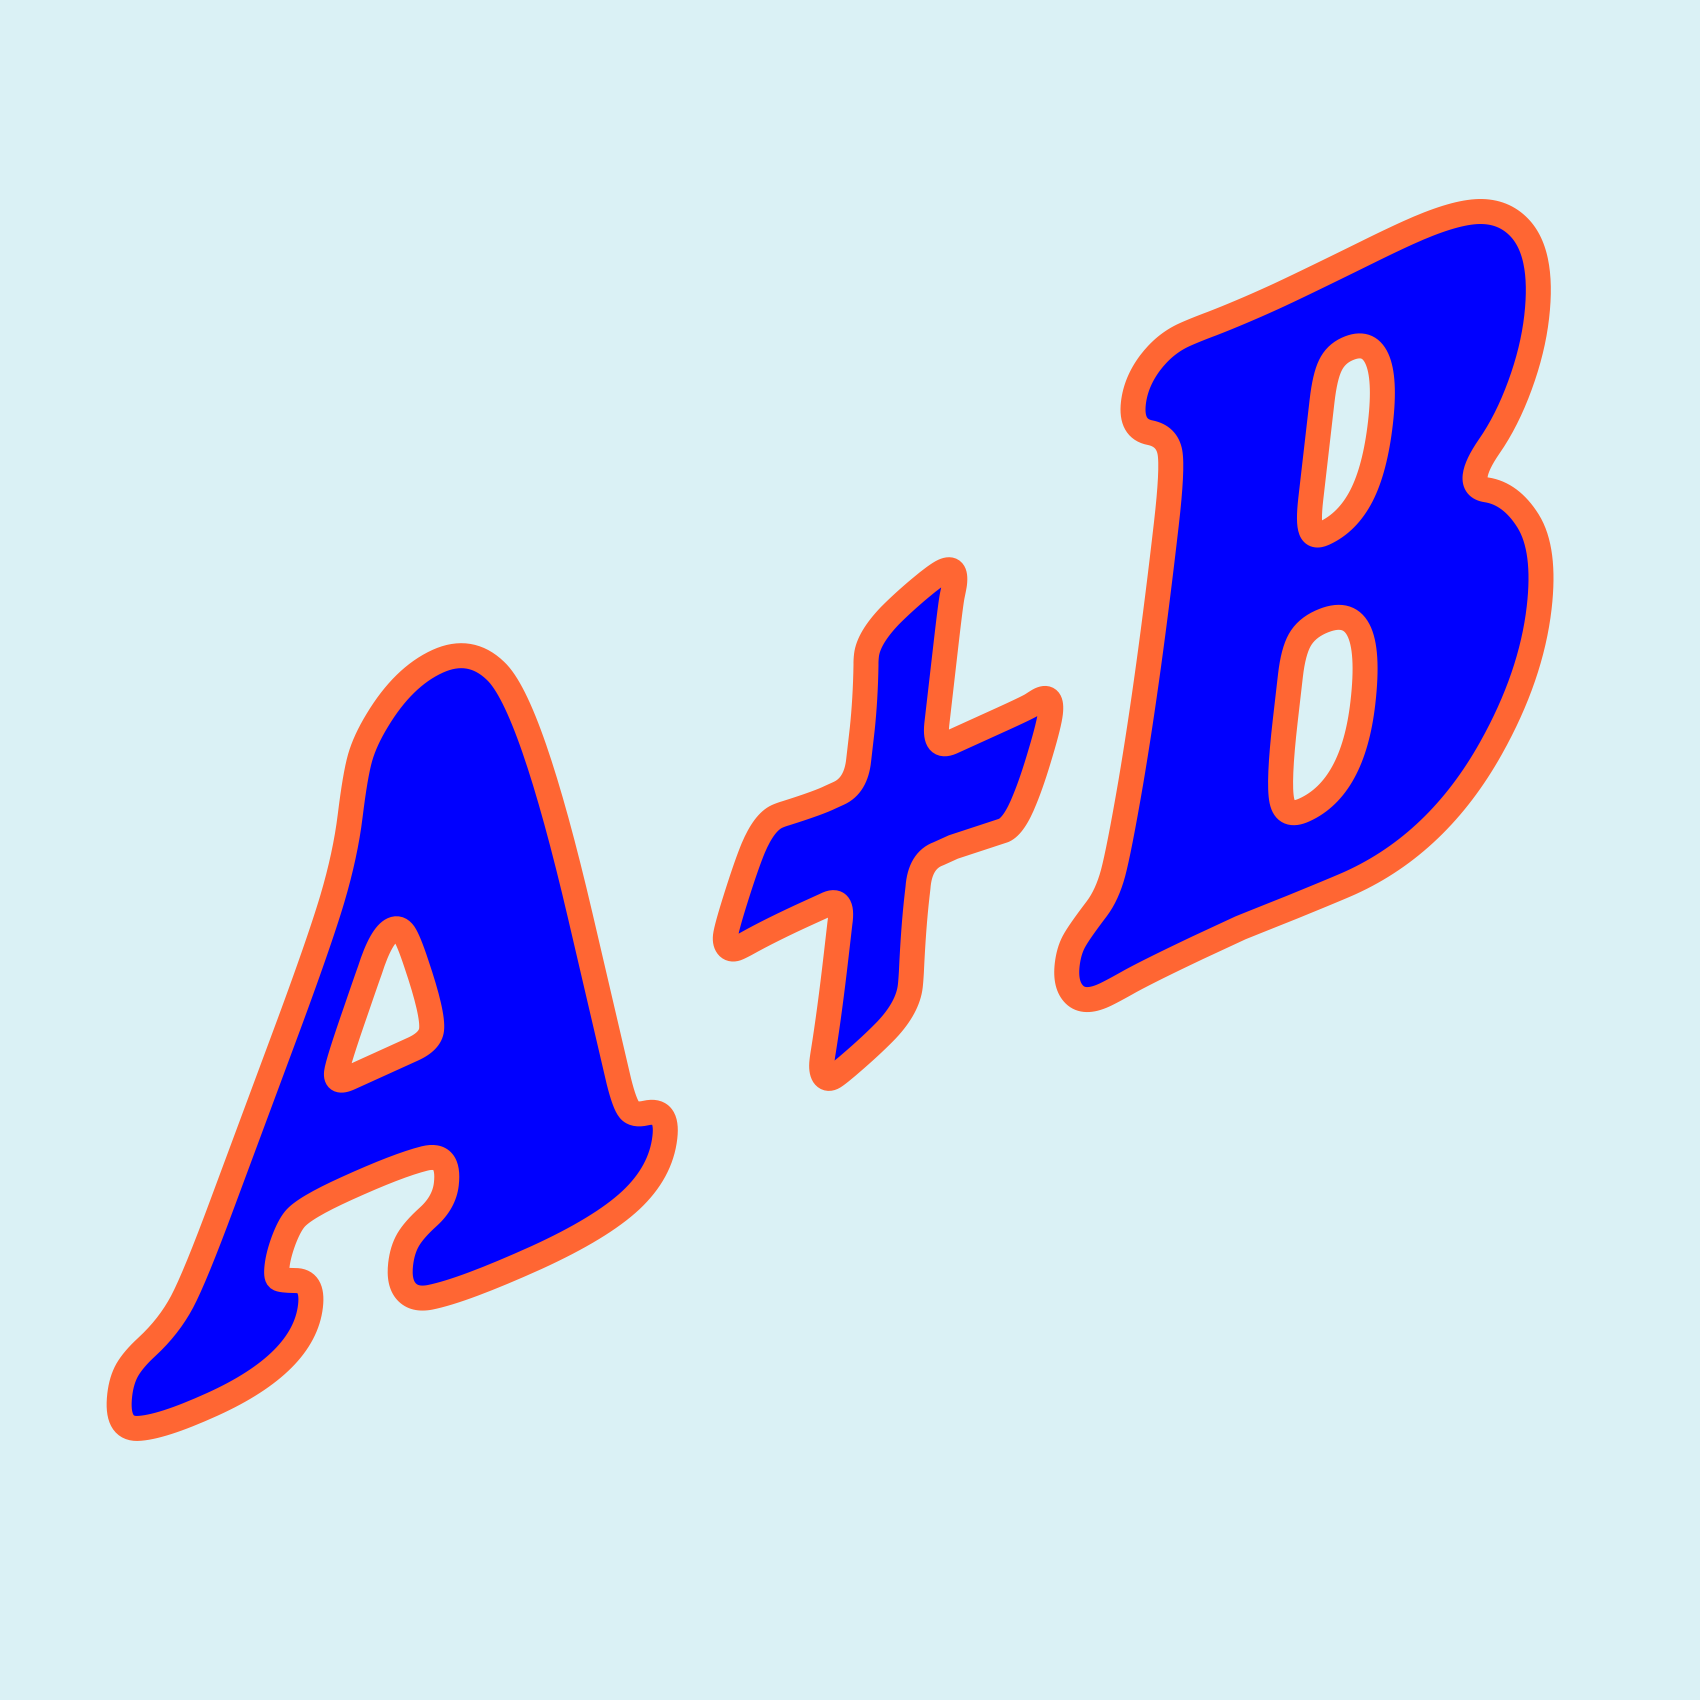 A+B written in big blue letters with a red border.